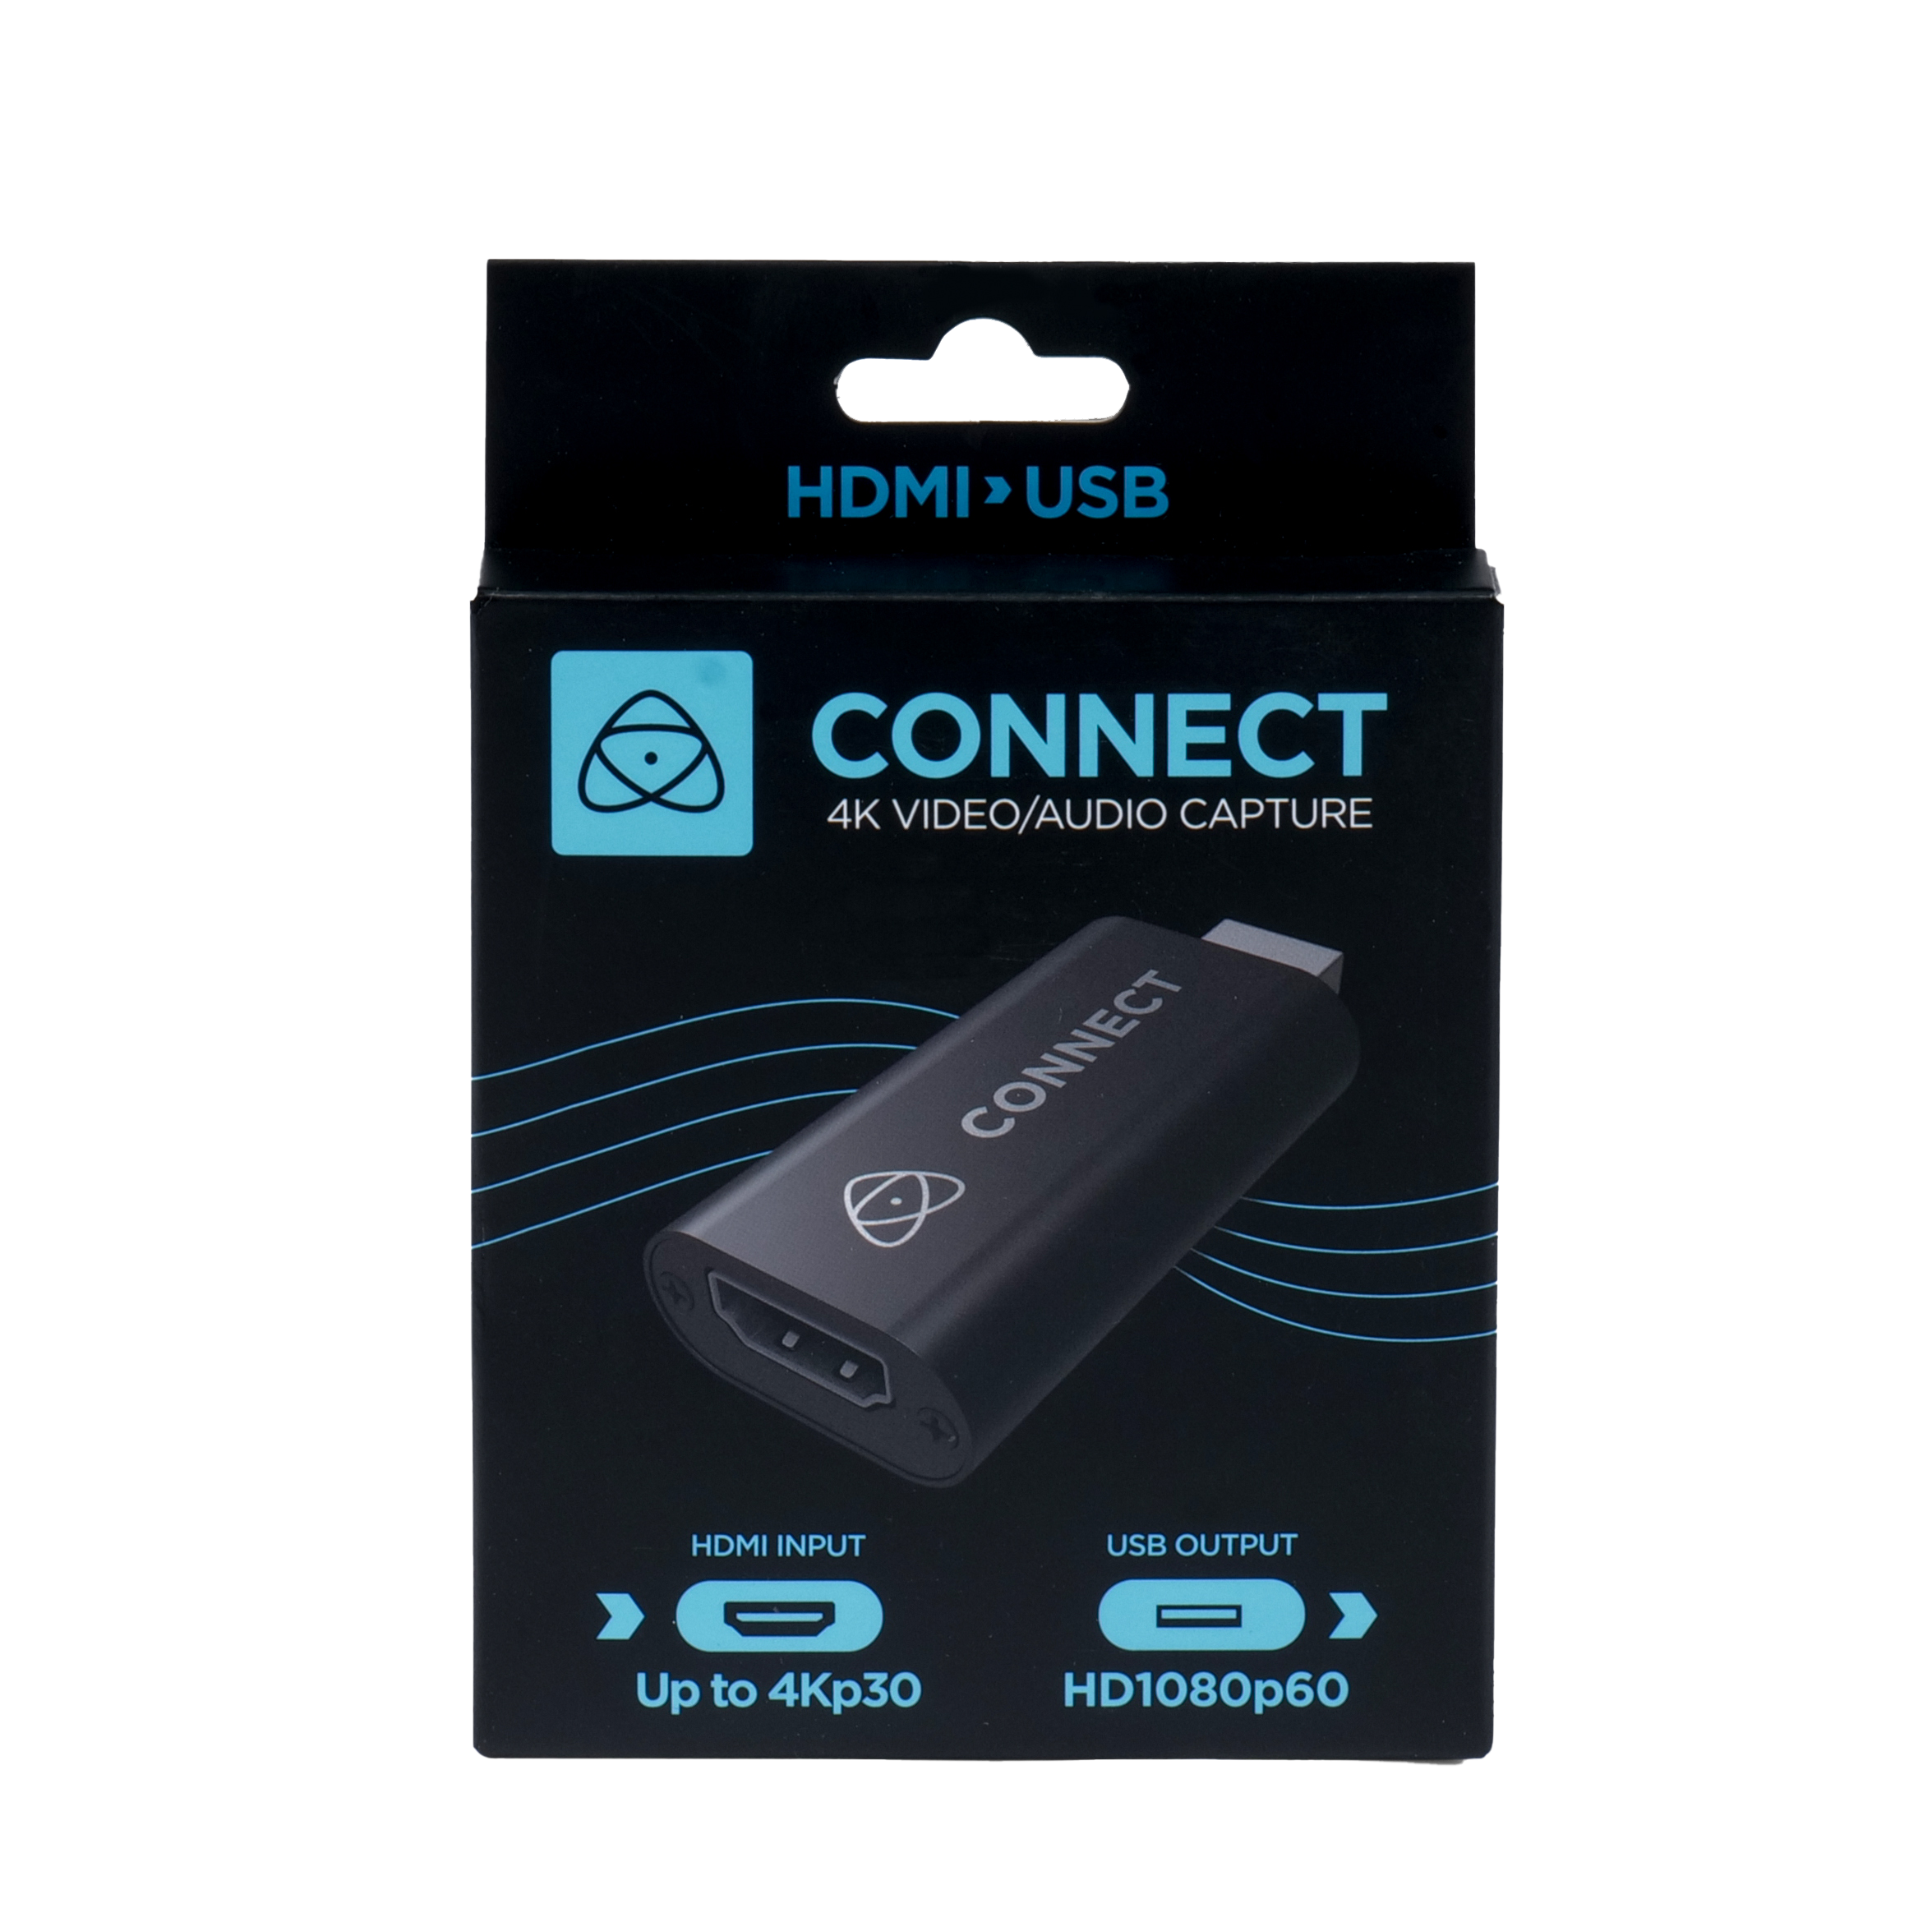 Connect 2 Streaming Stick HDMI/USB